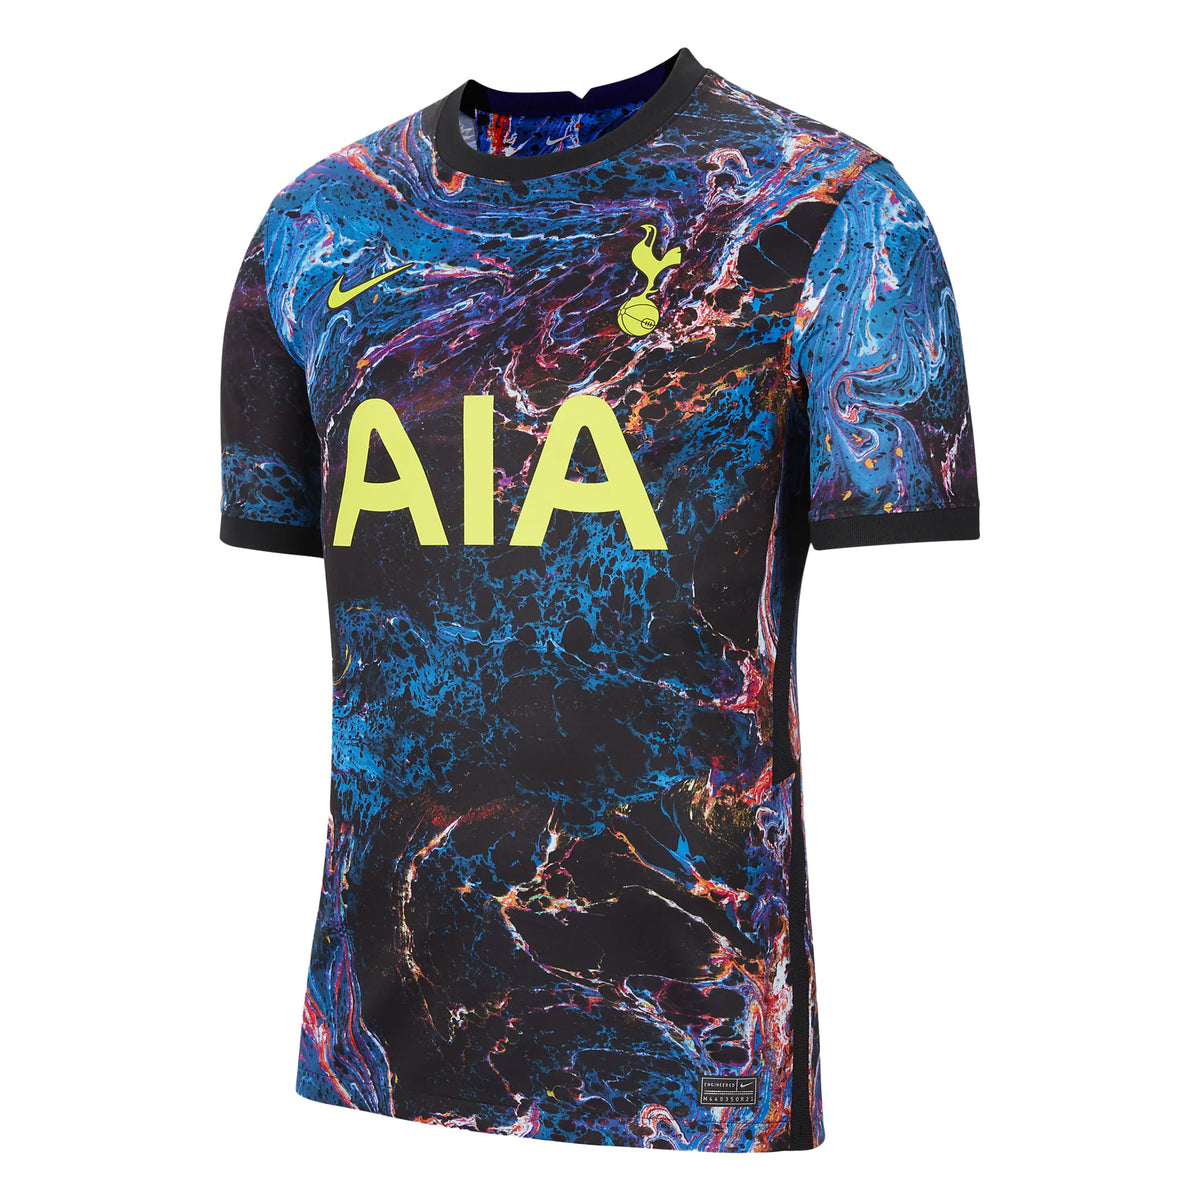 Tottenham kit: Nike release incredible NFL away jersey for Spurs